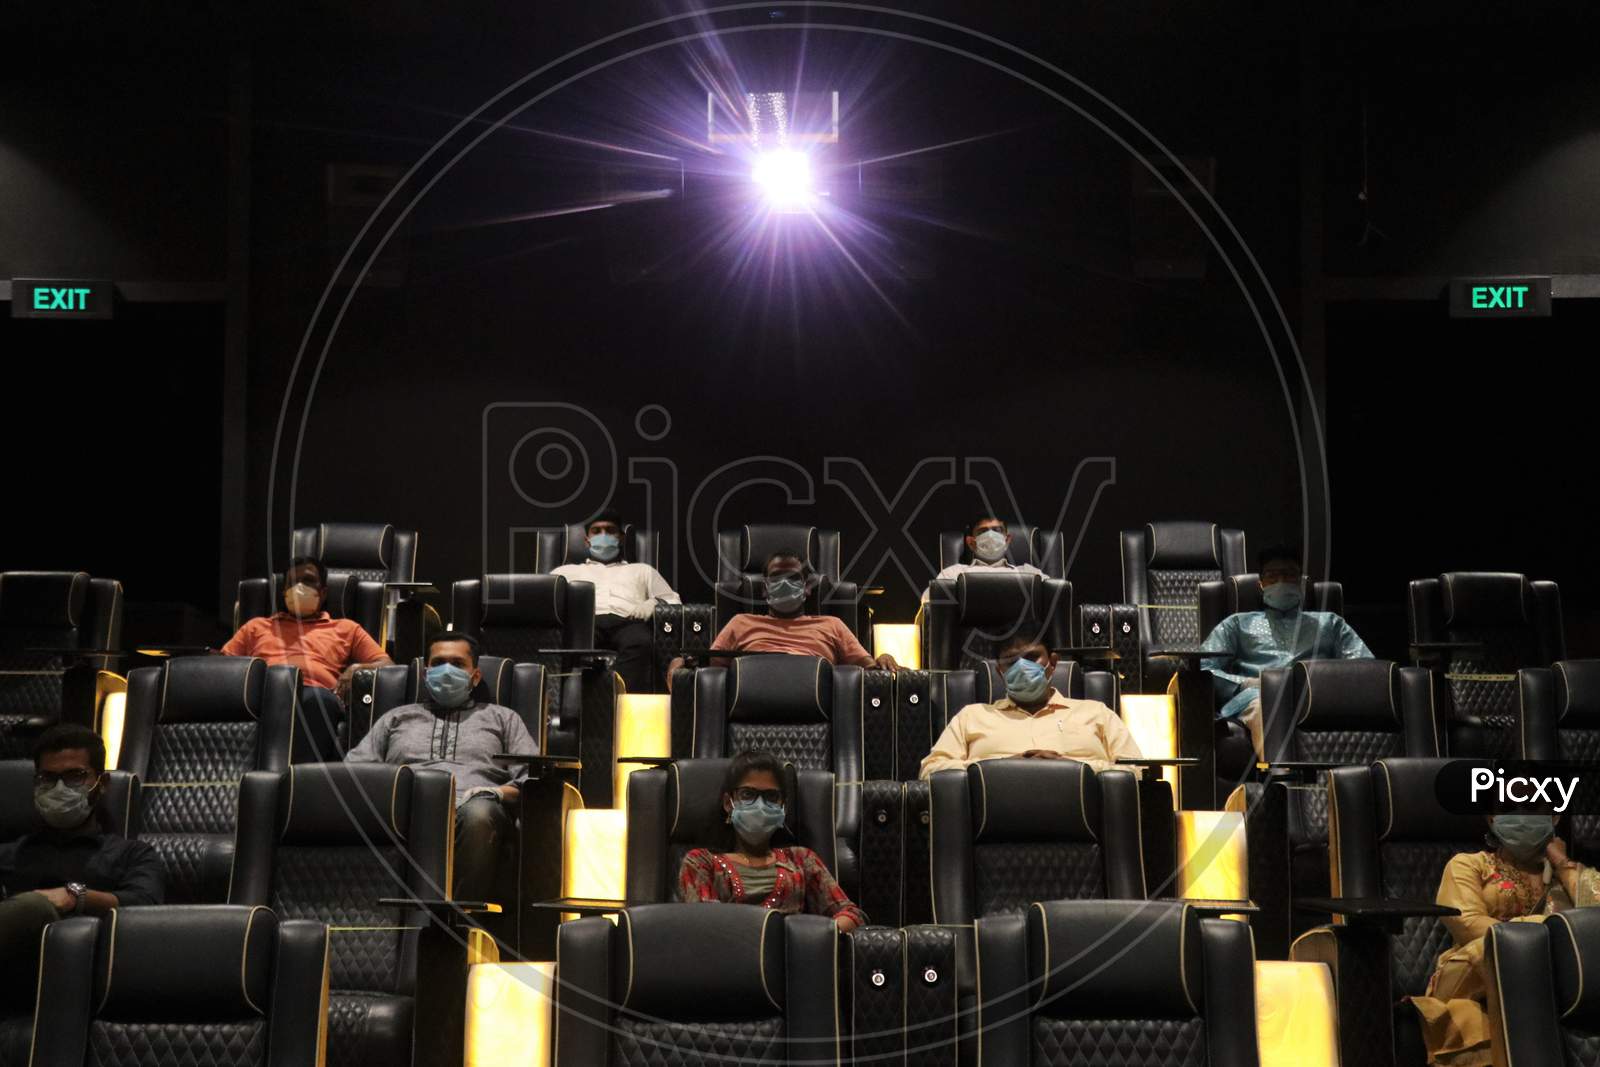 People wearing face masks as a precaution measure are seen at a movie theatre amidst the outbreak of the coronavirus disease (COVID-19), in Mumbai, India on November 15, 2020.